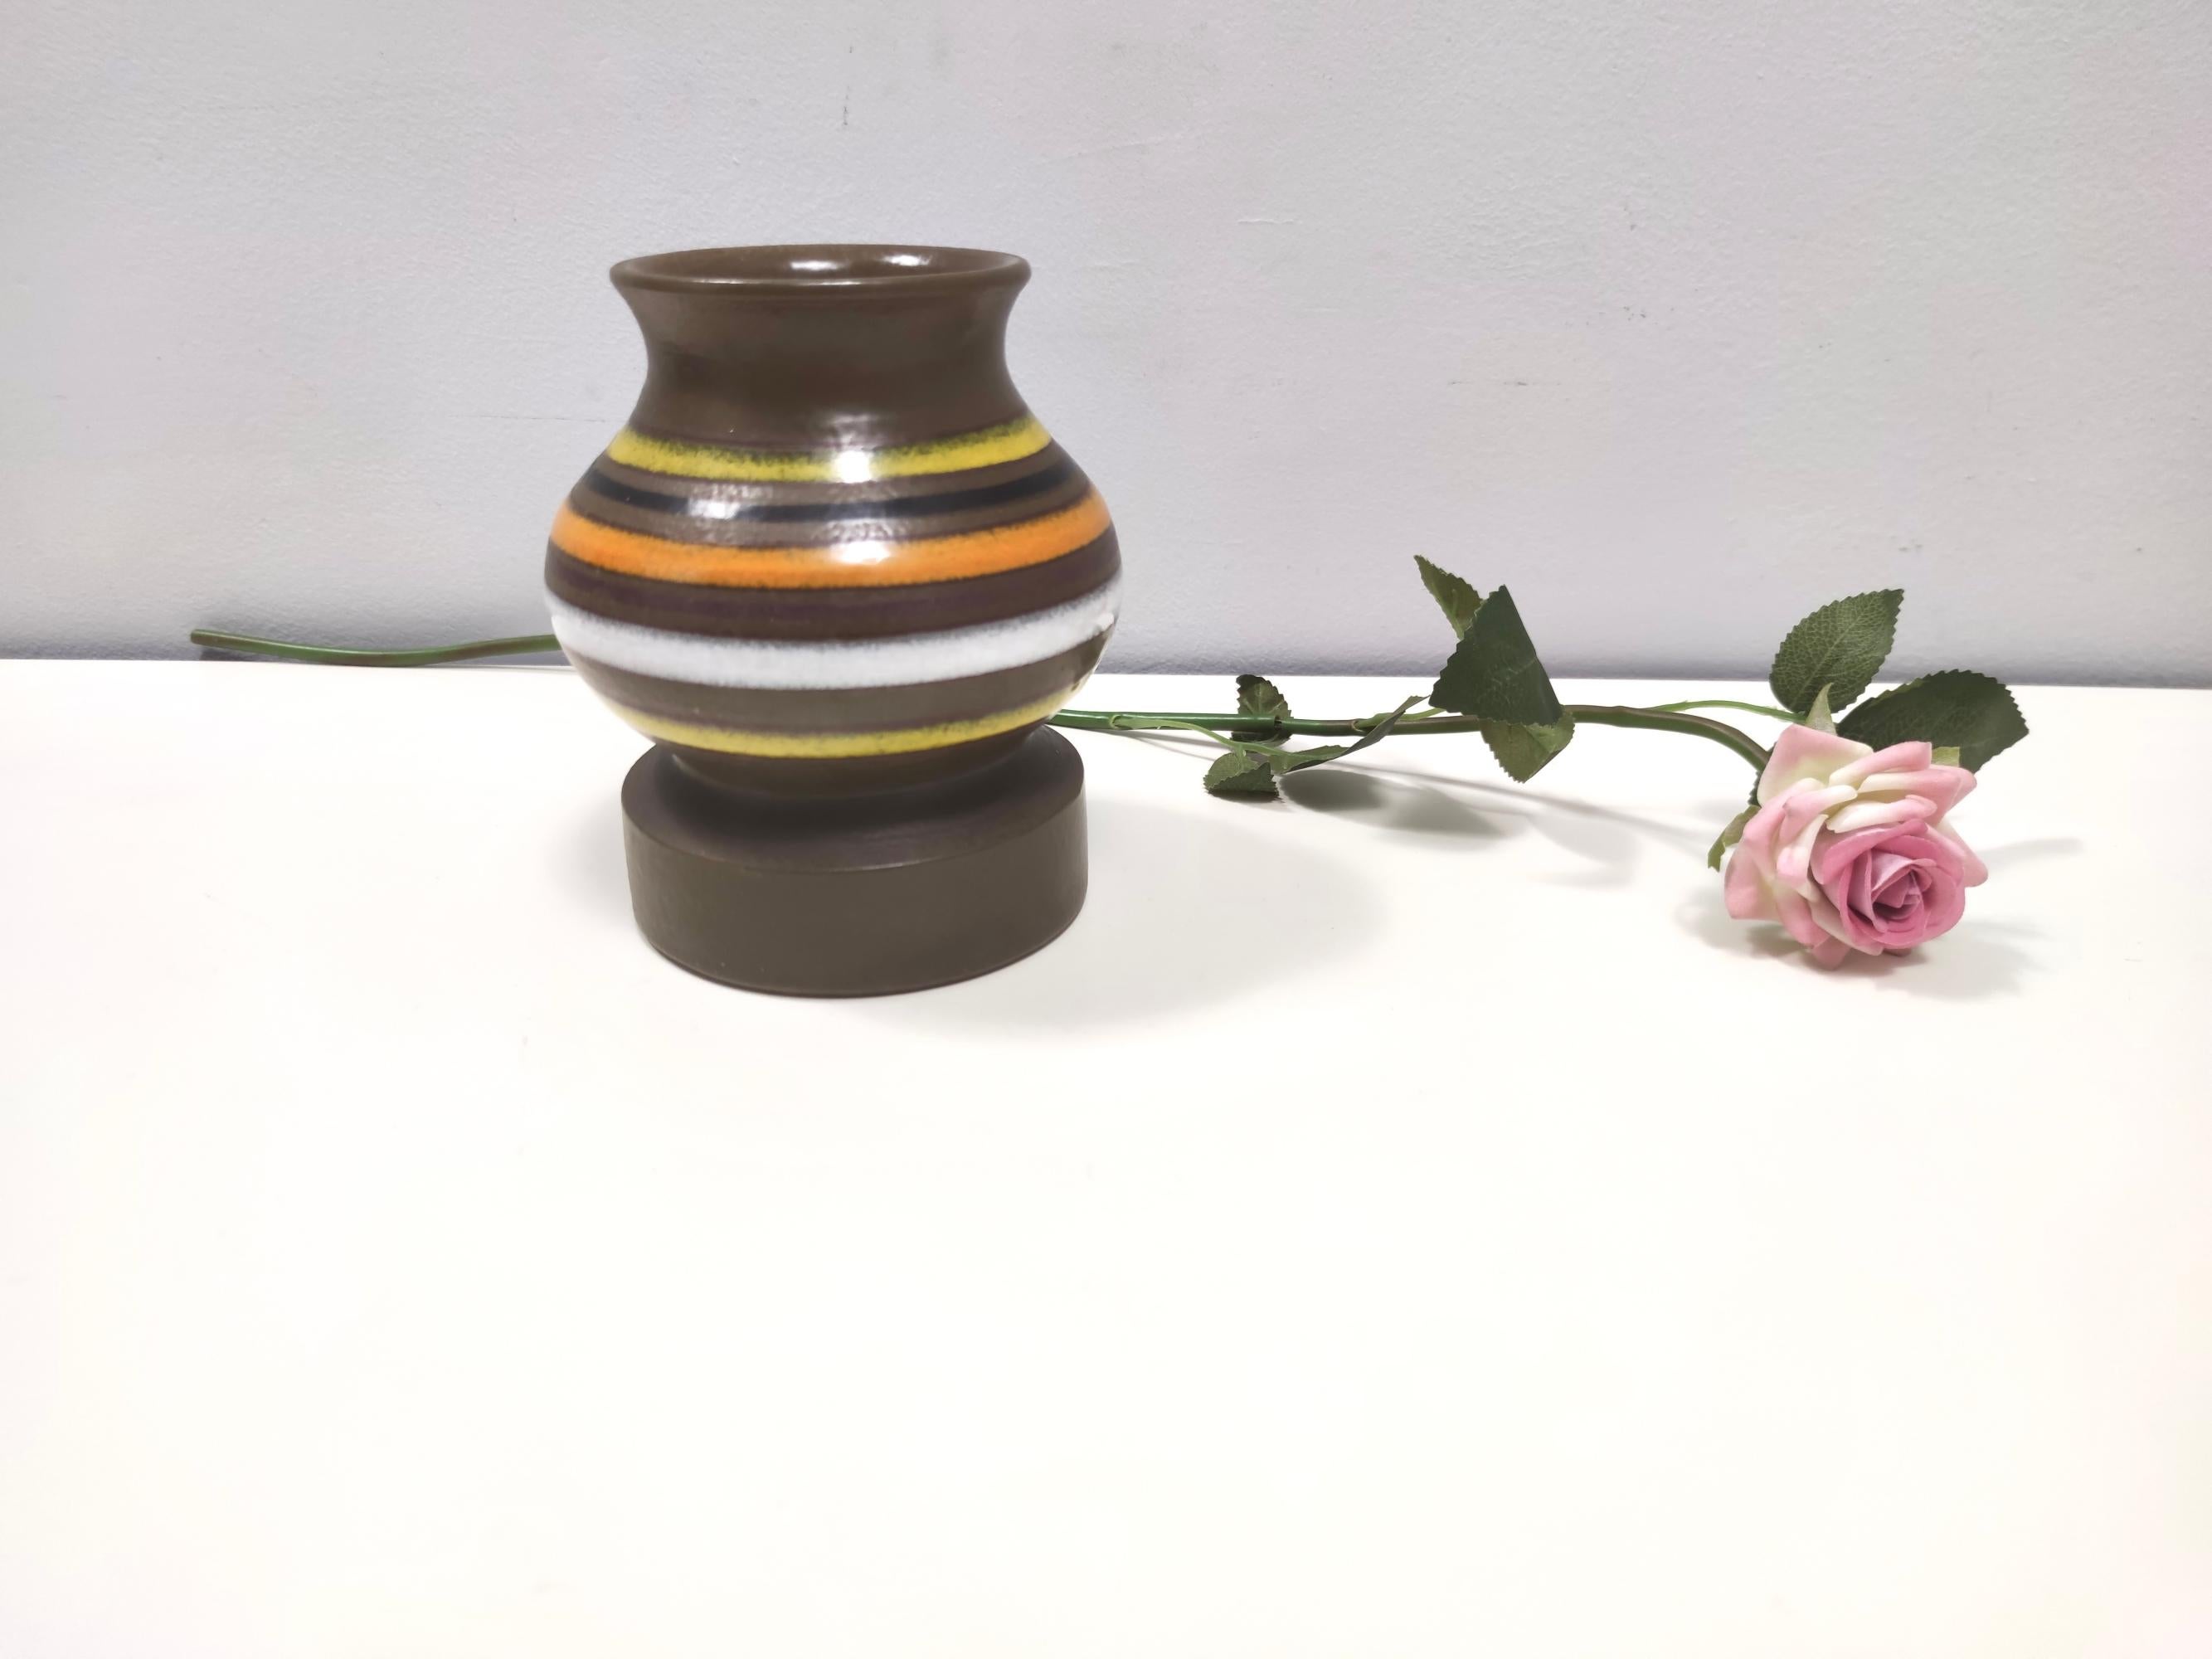 Made in Italy, 1970s. 
This is a brown enameled earthenware vase with a linear pattern of different colors.
It is a vintage item, therefore it might show slight traces of use, but it can be considered as in excellent original condition and ready to